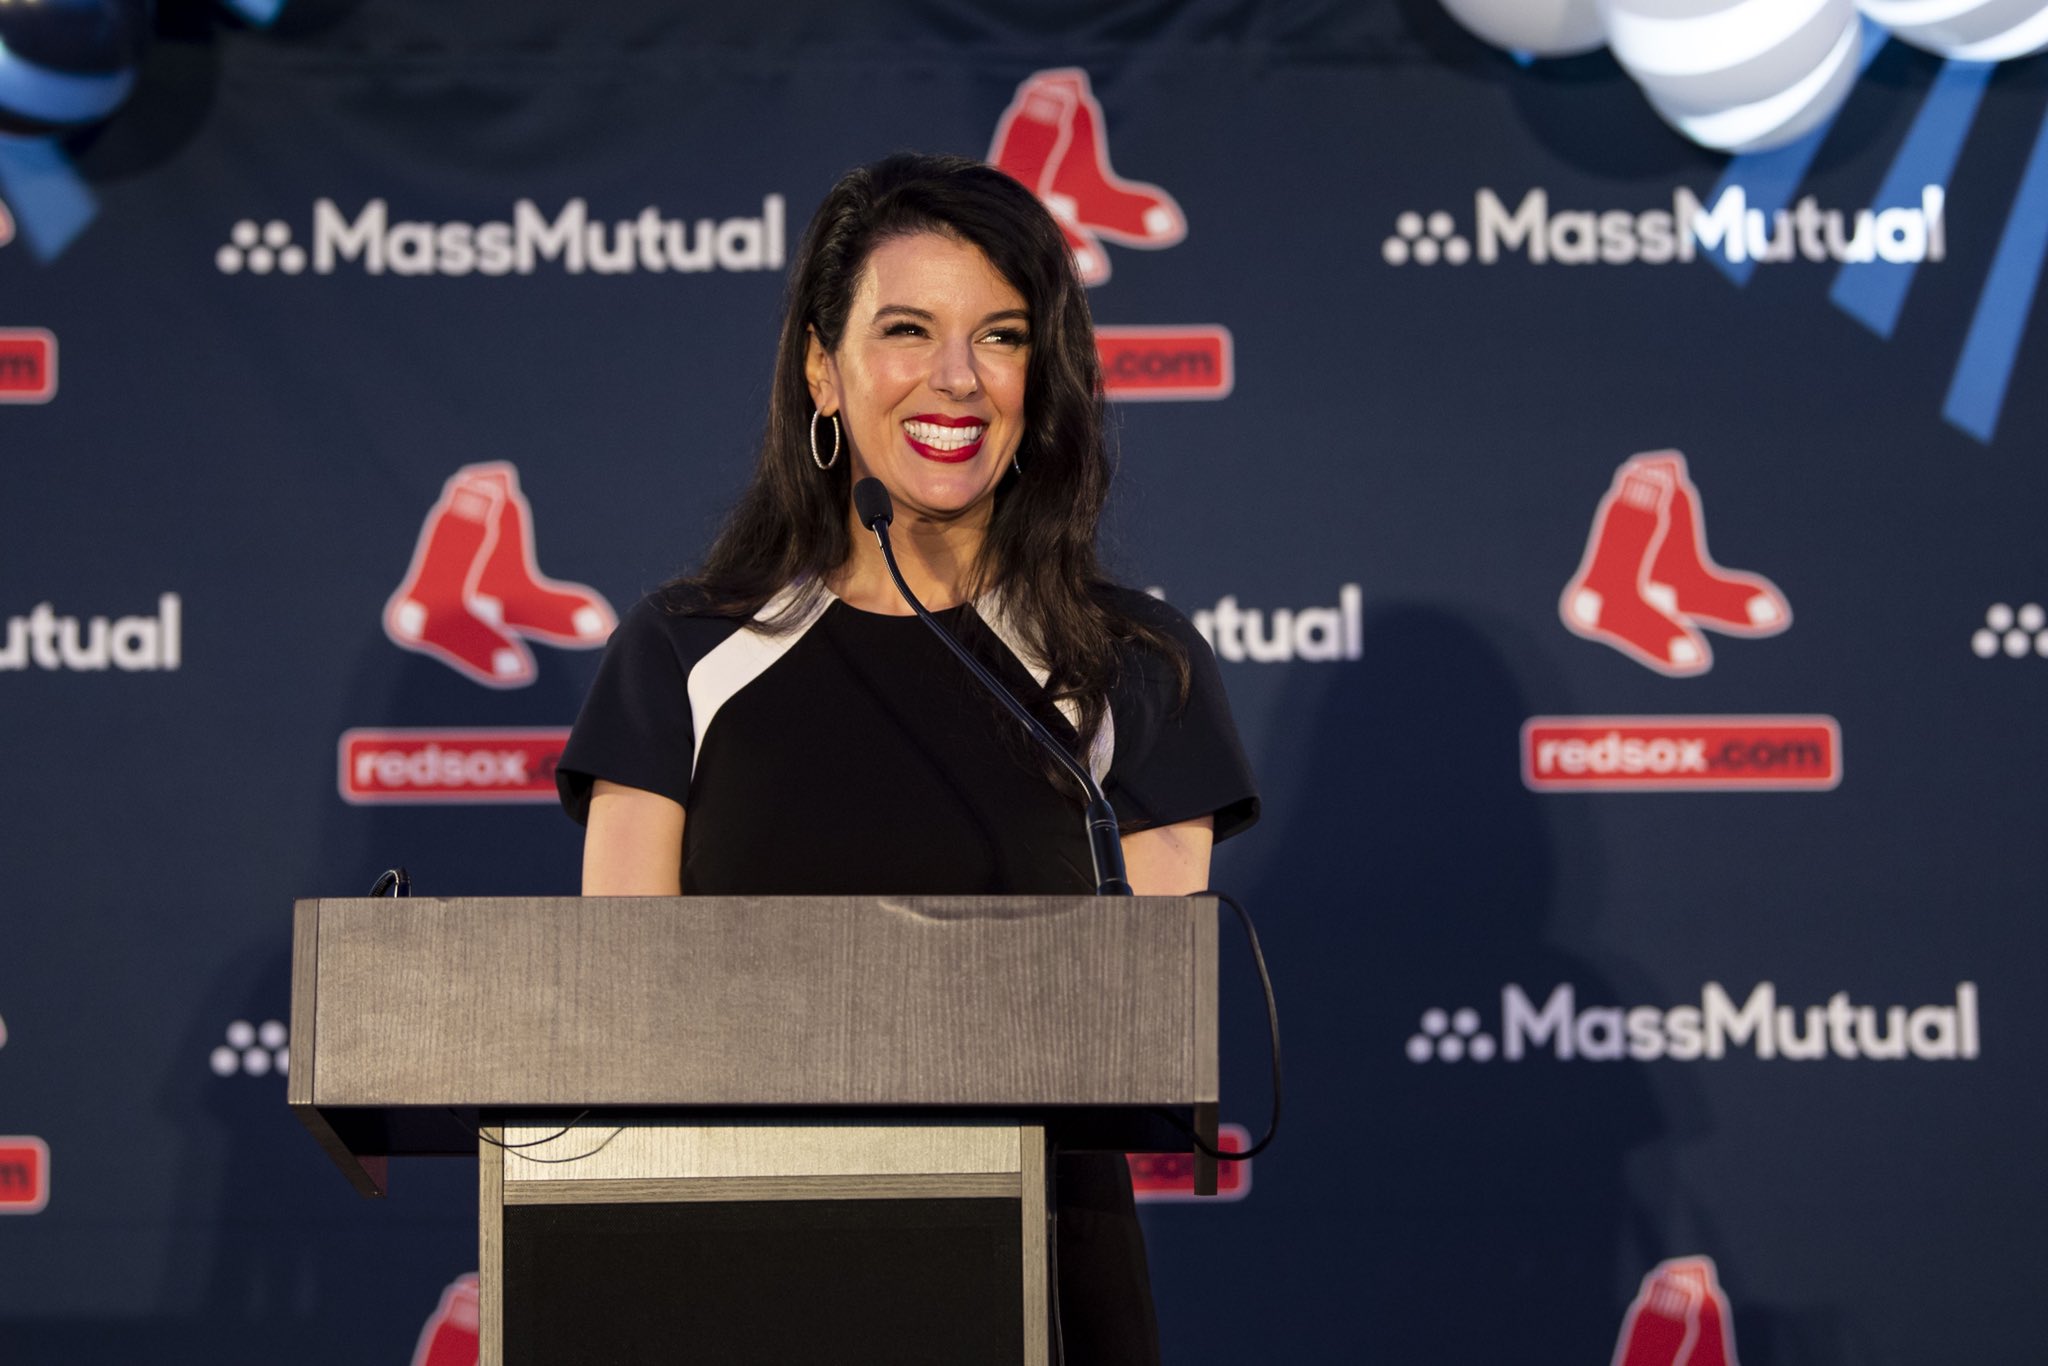 Red Sox on X: Thanks to @MassMutual Foundation, hundreds of